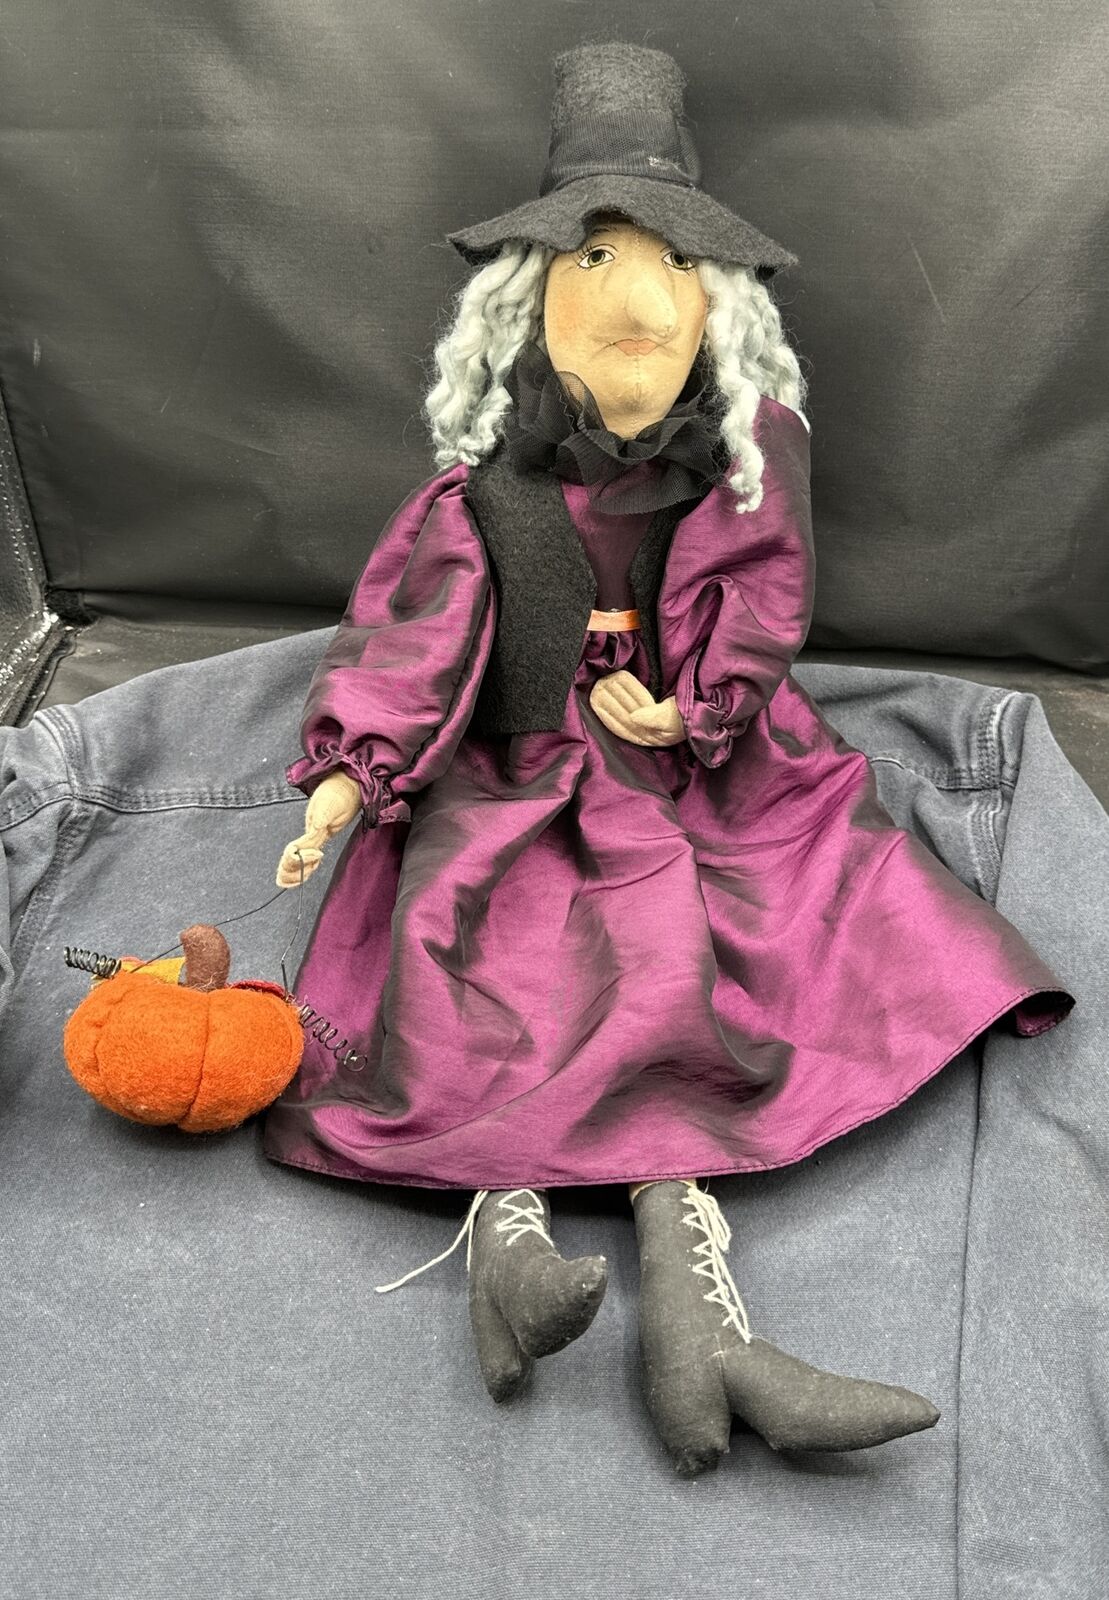 Gathered Traditions Halloween Witch Doll With Pumpkin Joe Spencer Purple Dress